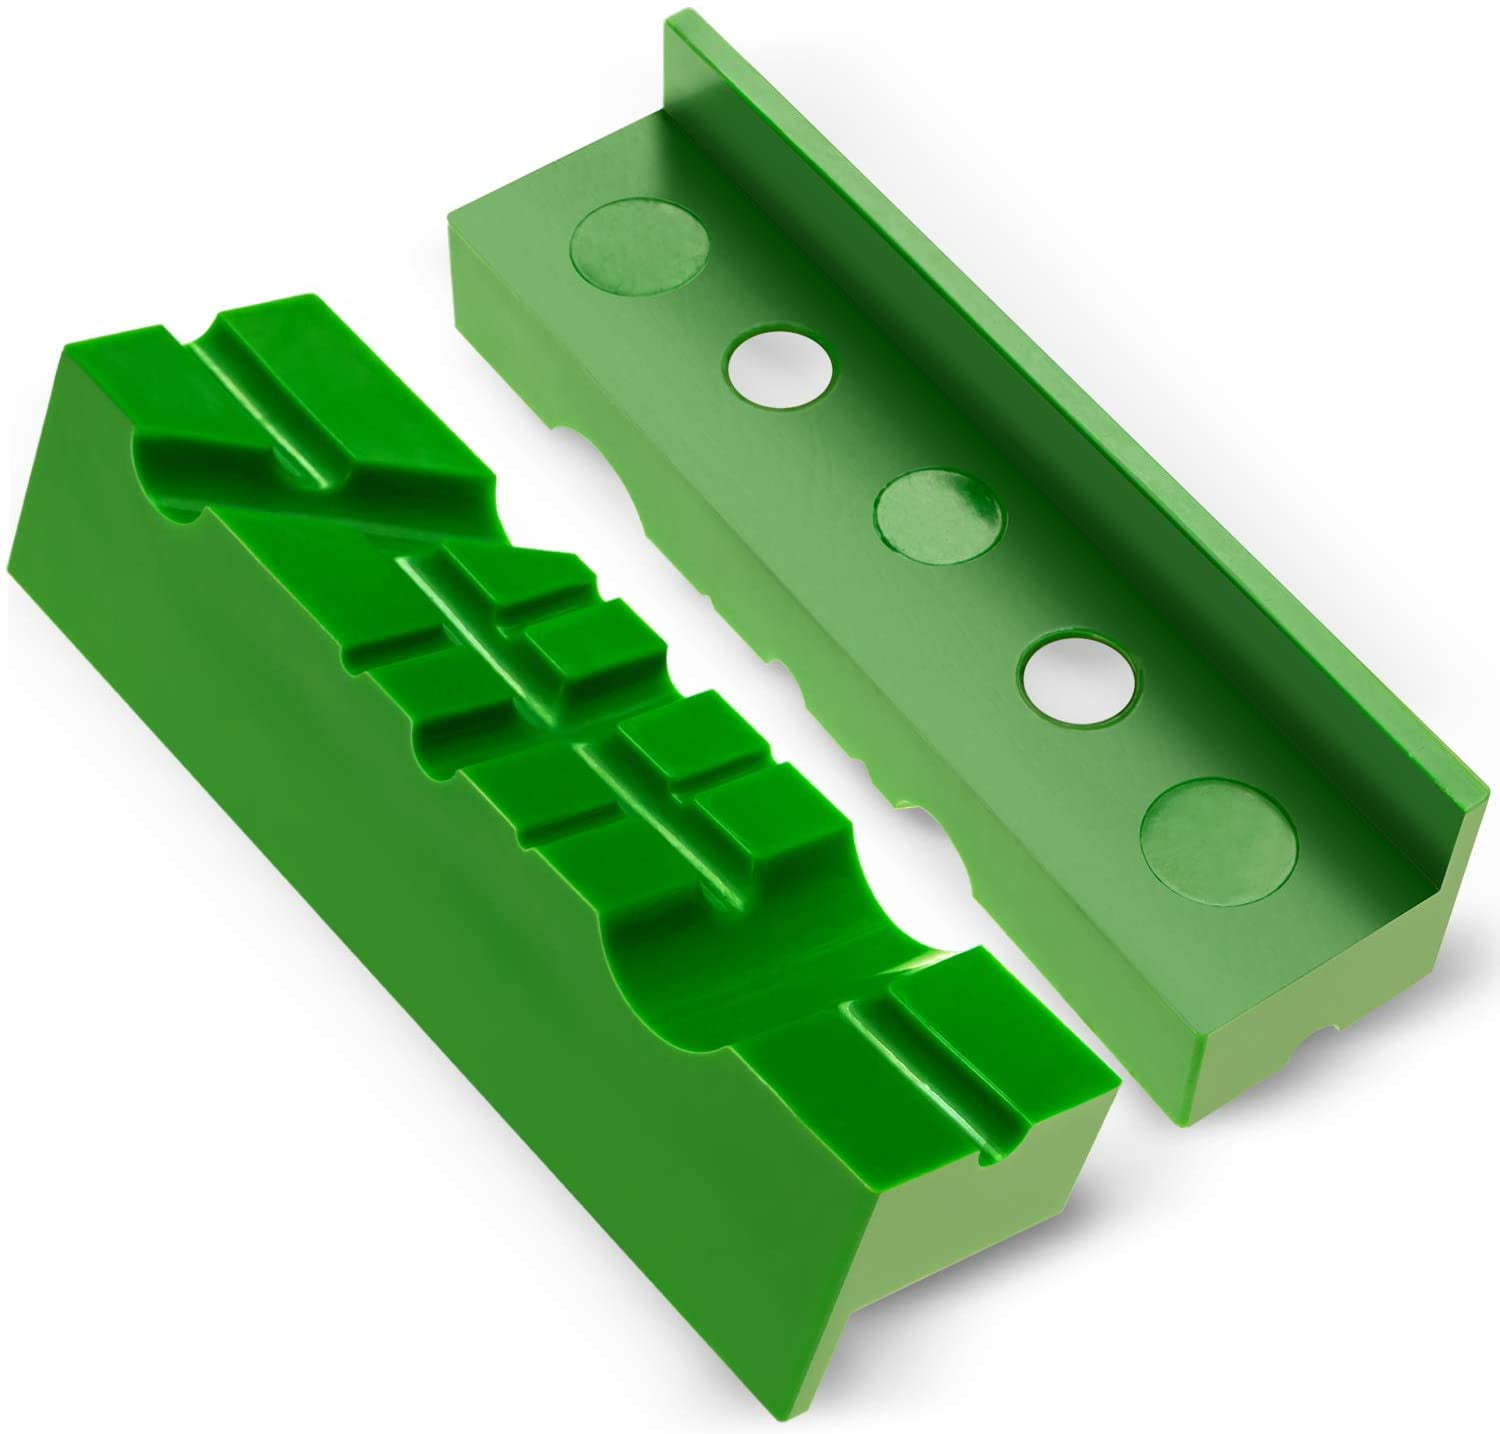 Lisle 48100 Aluminum Rubber Faced Vise Jaw Pads For Protecting Delicate Parts 